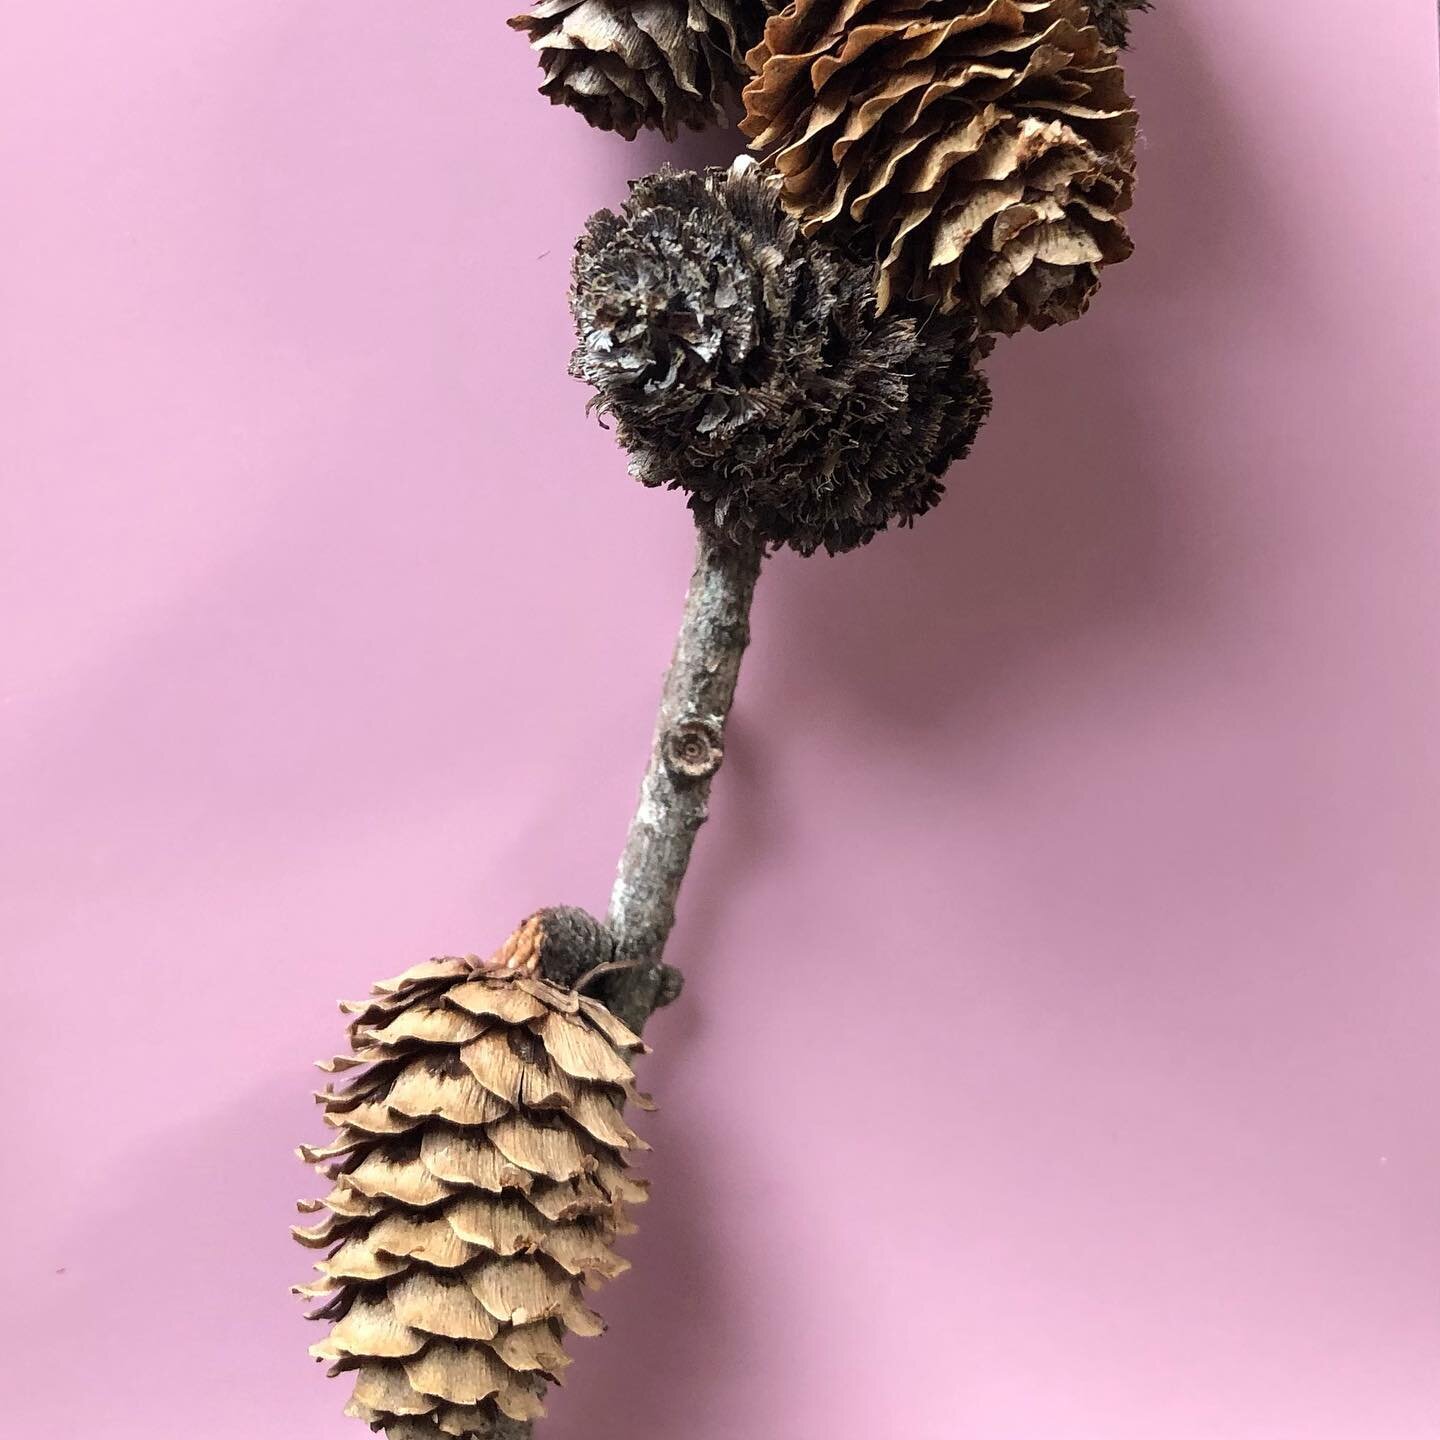 A little ode to November:
.
I&rsquo;ve been eyeing and selecting just the right pine cones for some illustrations since July. 
.
These pine cones have been in my studio for so long and I can&rsquo;t seem to toss them even though I finished the work. 